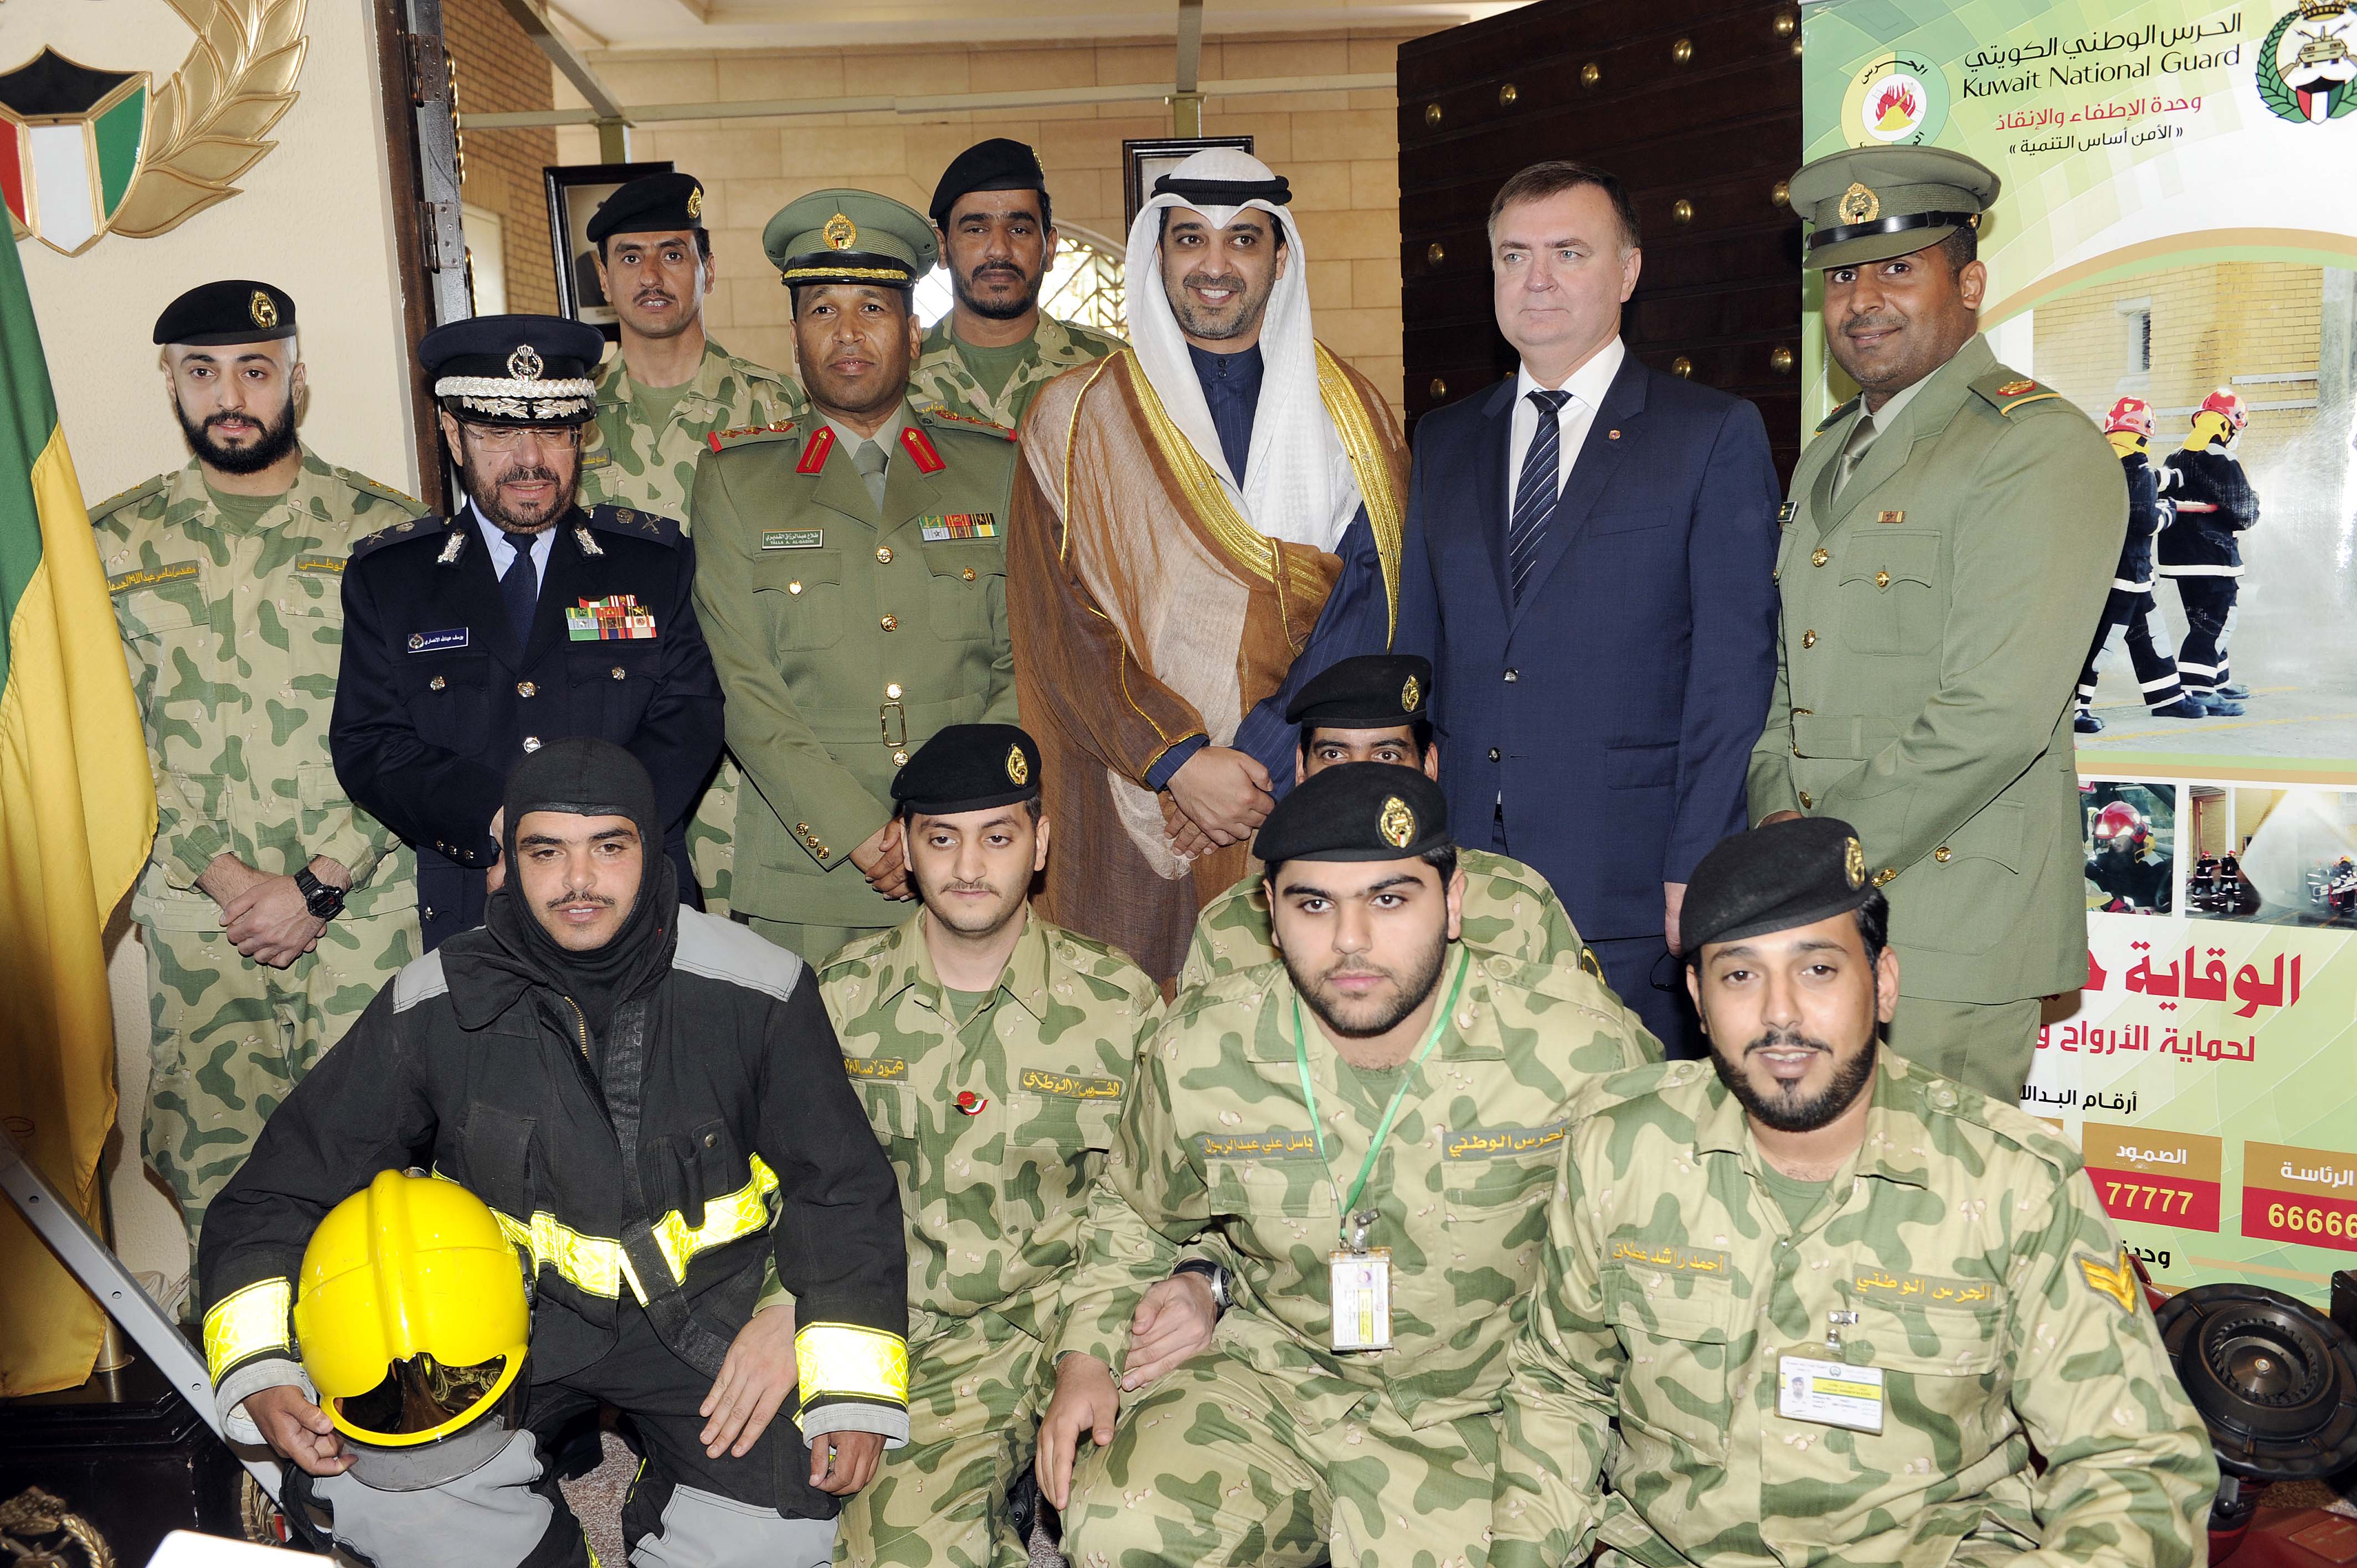 Minister of State for Cabinet's Affairs Sheikh Mohammad Abdullah Al-Mubarak Al-Sabah in the 13th Firemen's Day festival organized by the Kuwait Fire Service Directorate